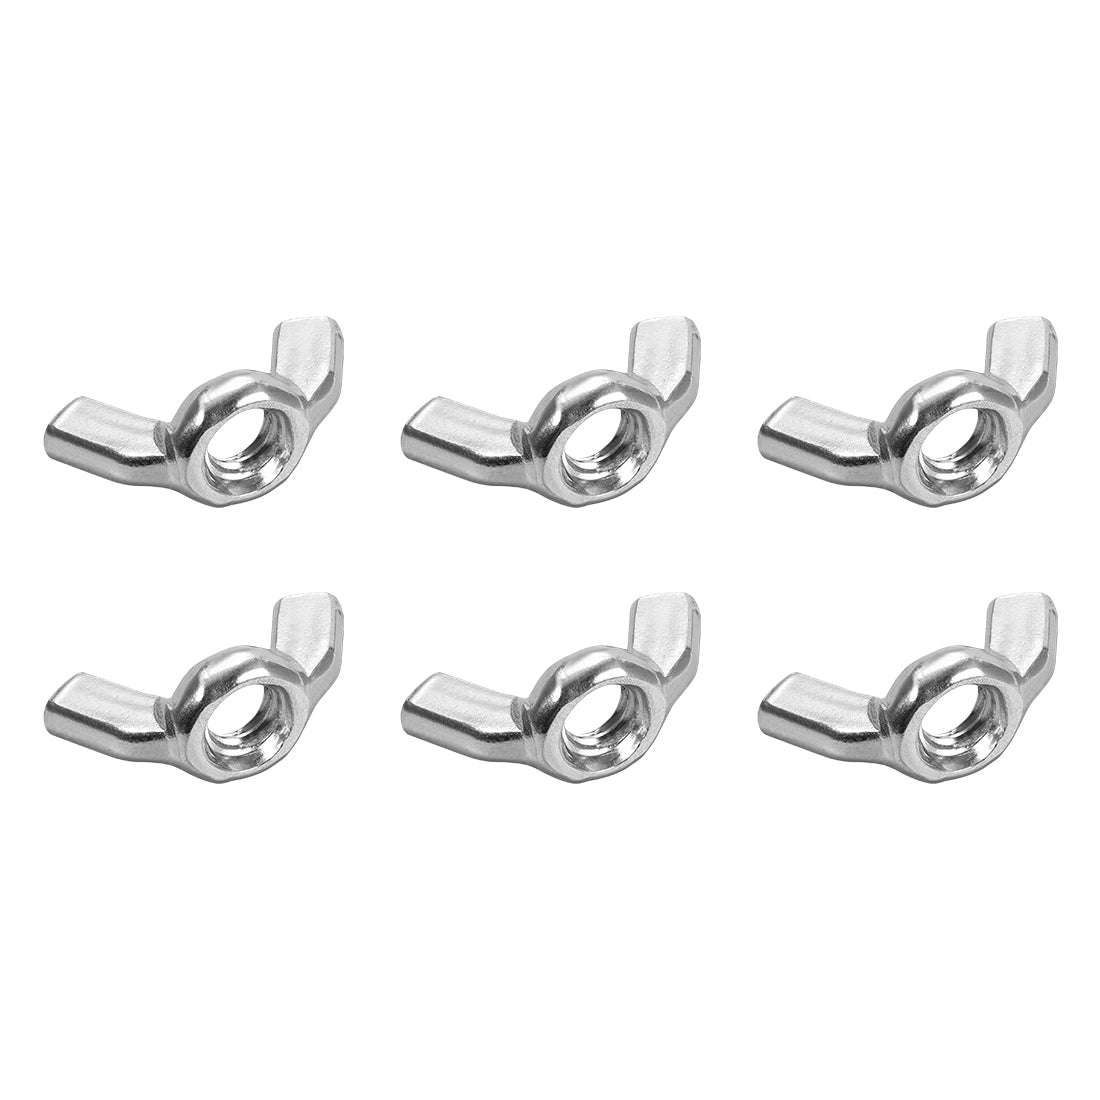 uxcell Uxcell Metric Wing Nuts, Carbon Steel Zinc Plated Hand Twist Tighten Ear Butterfly Nut, 6 Pcs